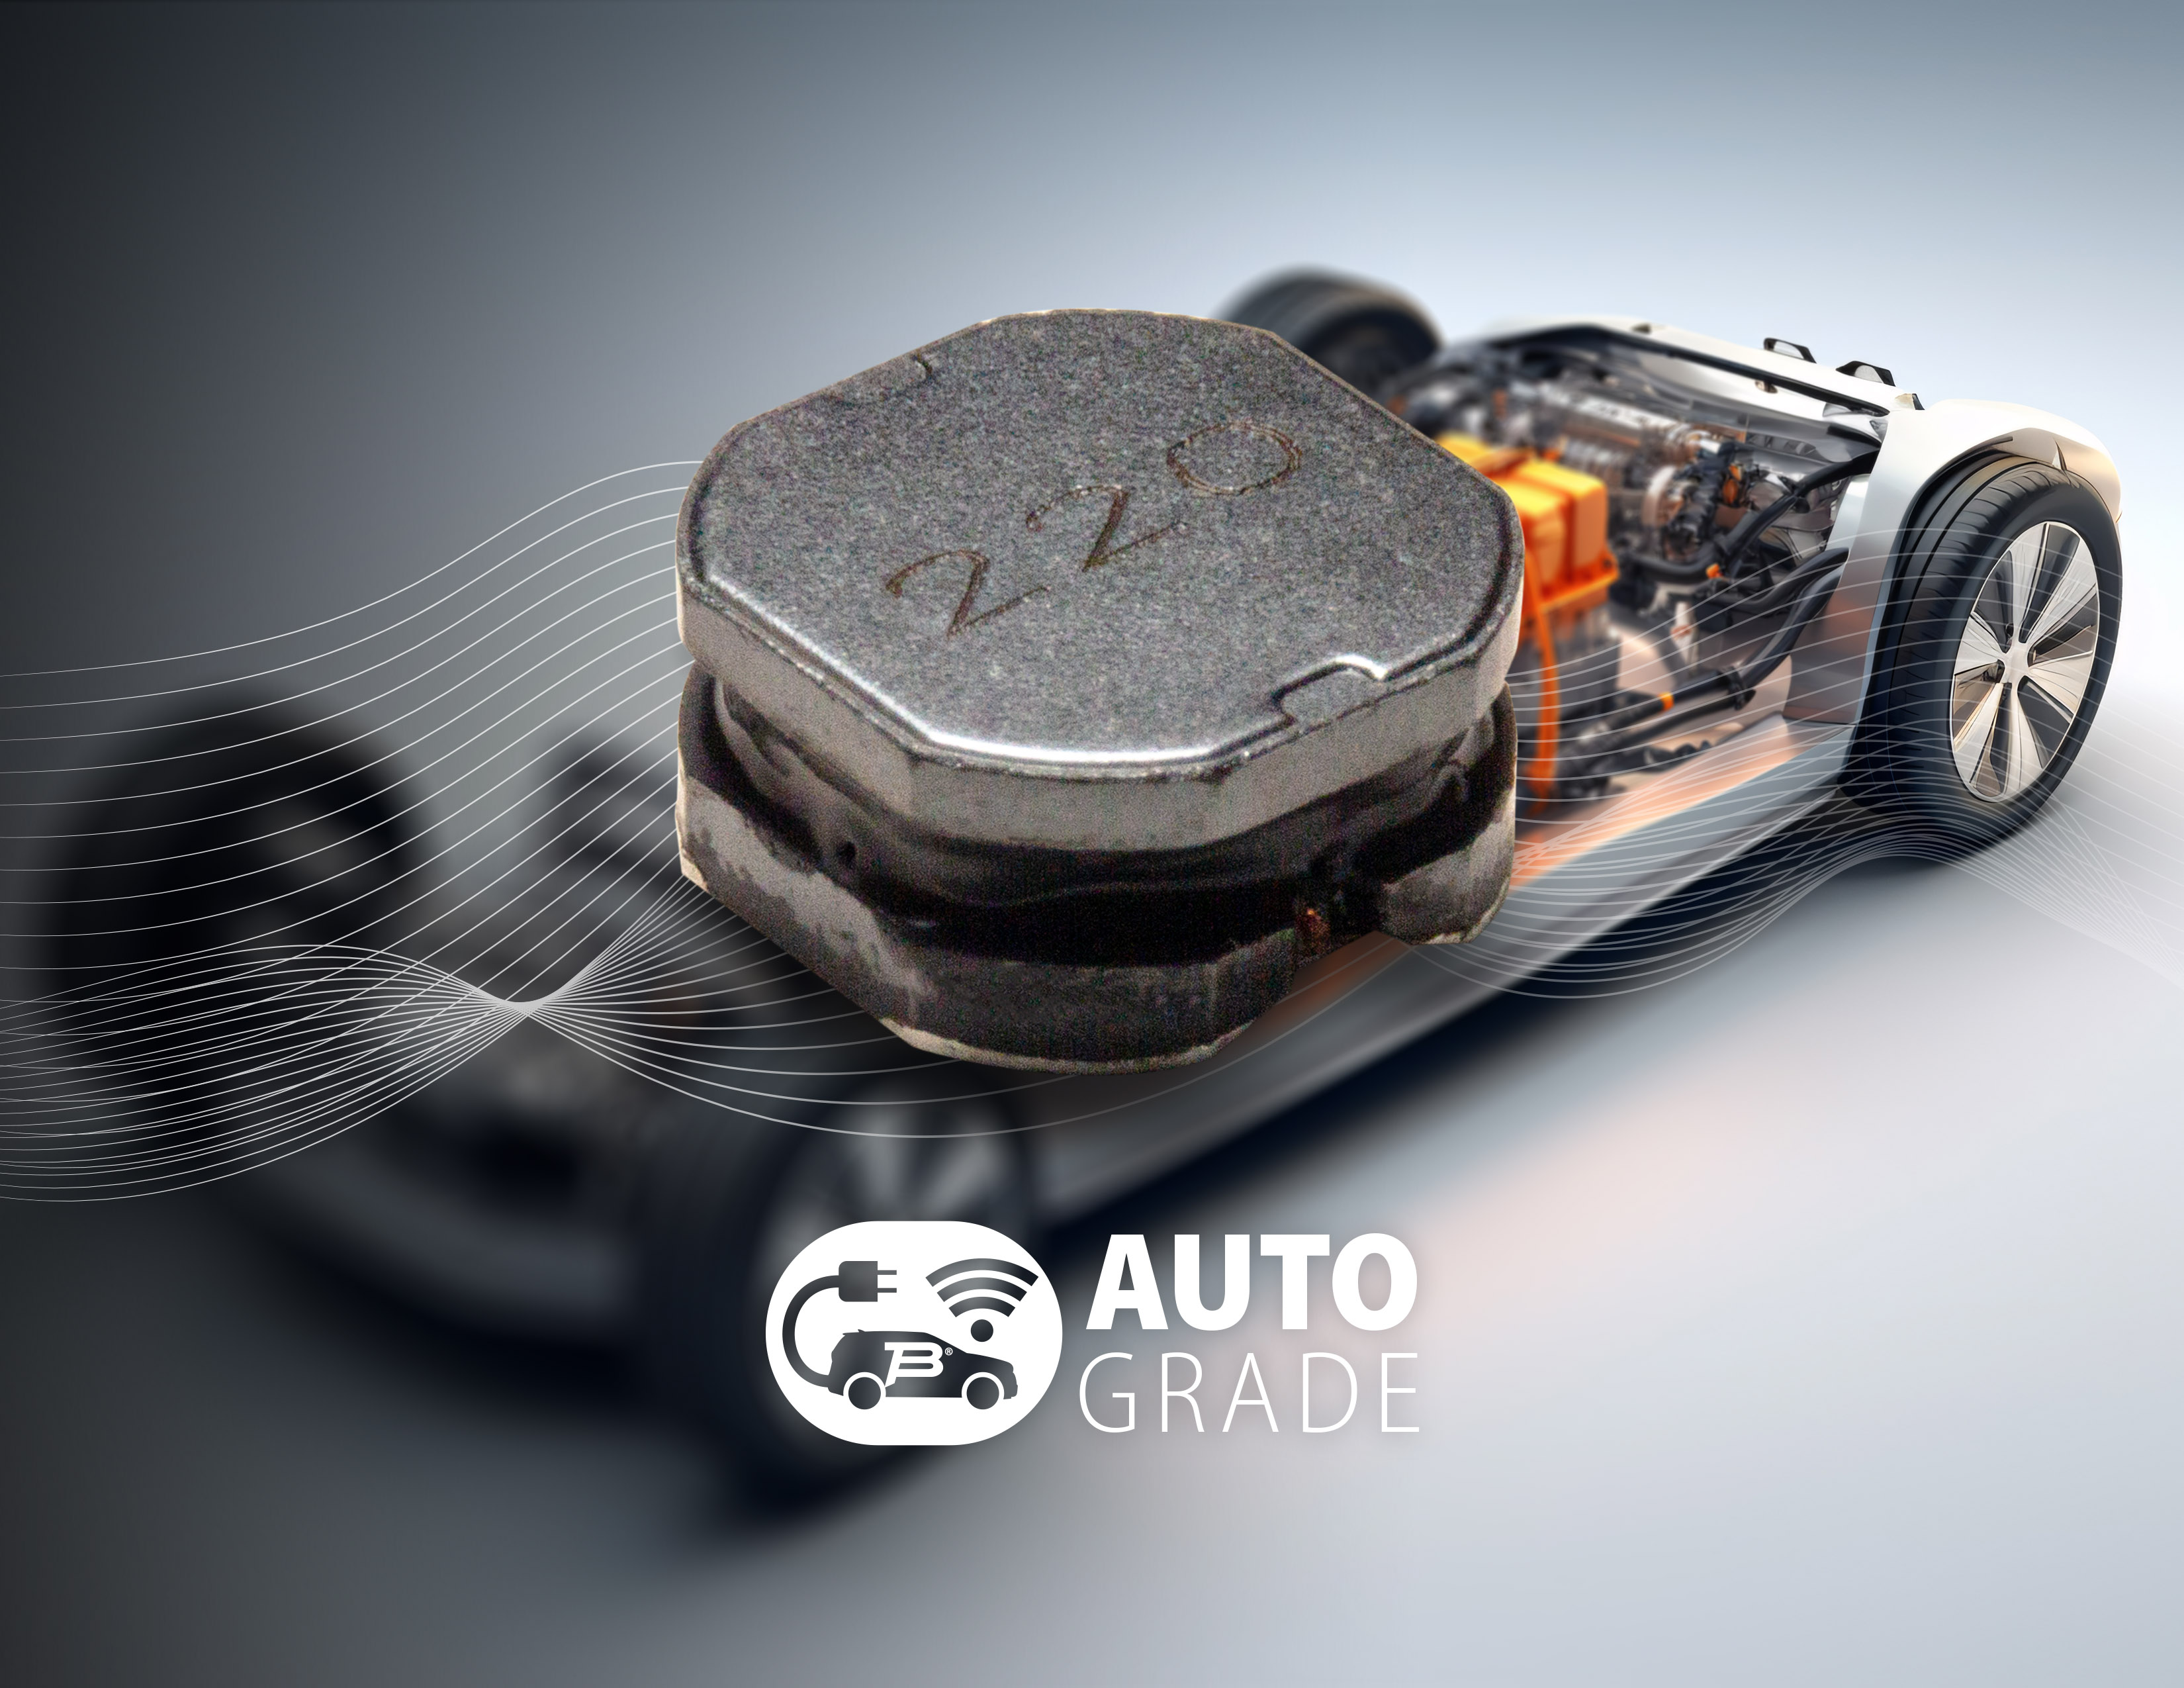 Bourns Launches Automotive Grade Semi-shielded Power Inductor Series Featuring High Operating Temperatures Up to 150°C